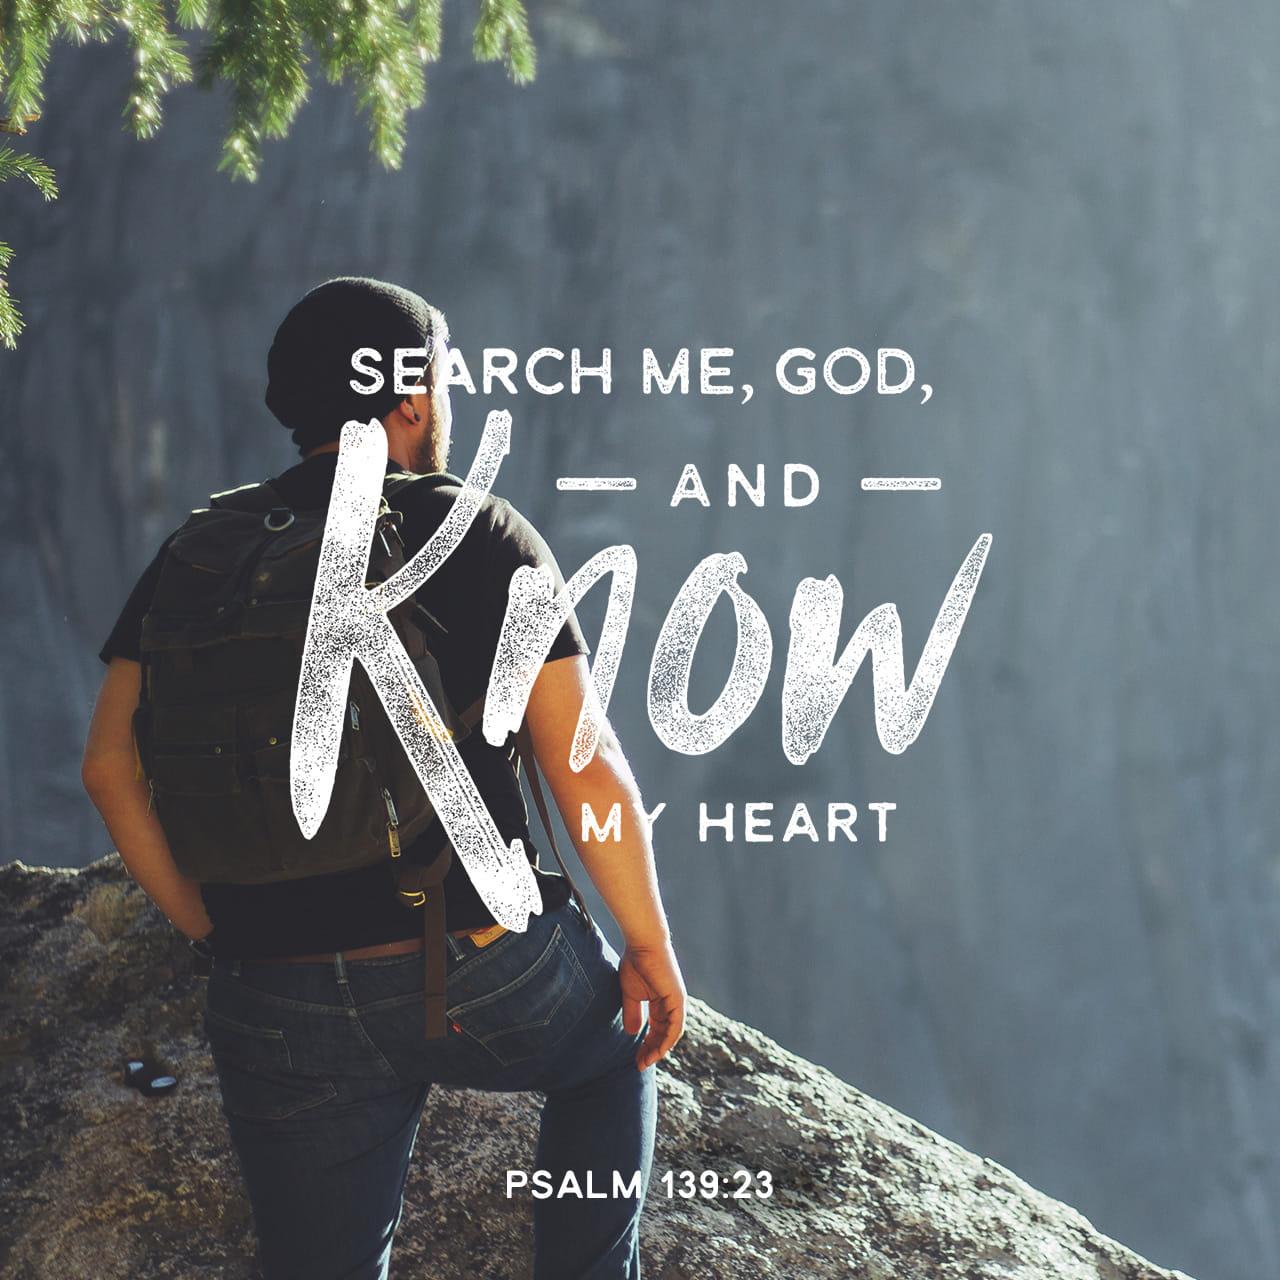 Bible verse of the day - Day 84 - image 697 (Psalms 139:23-24)